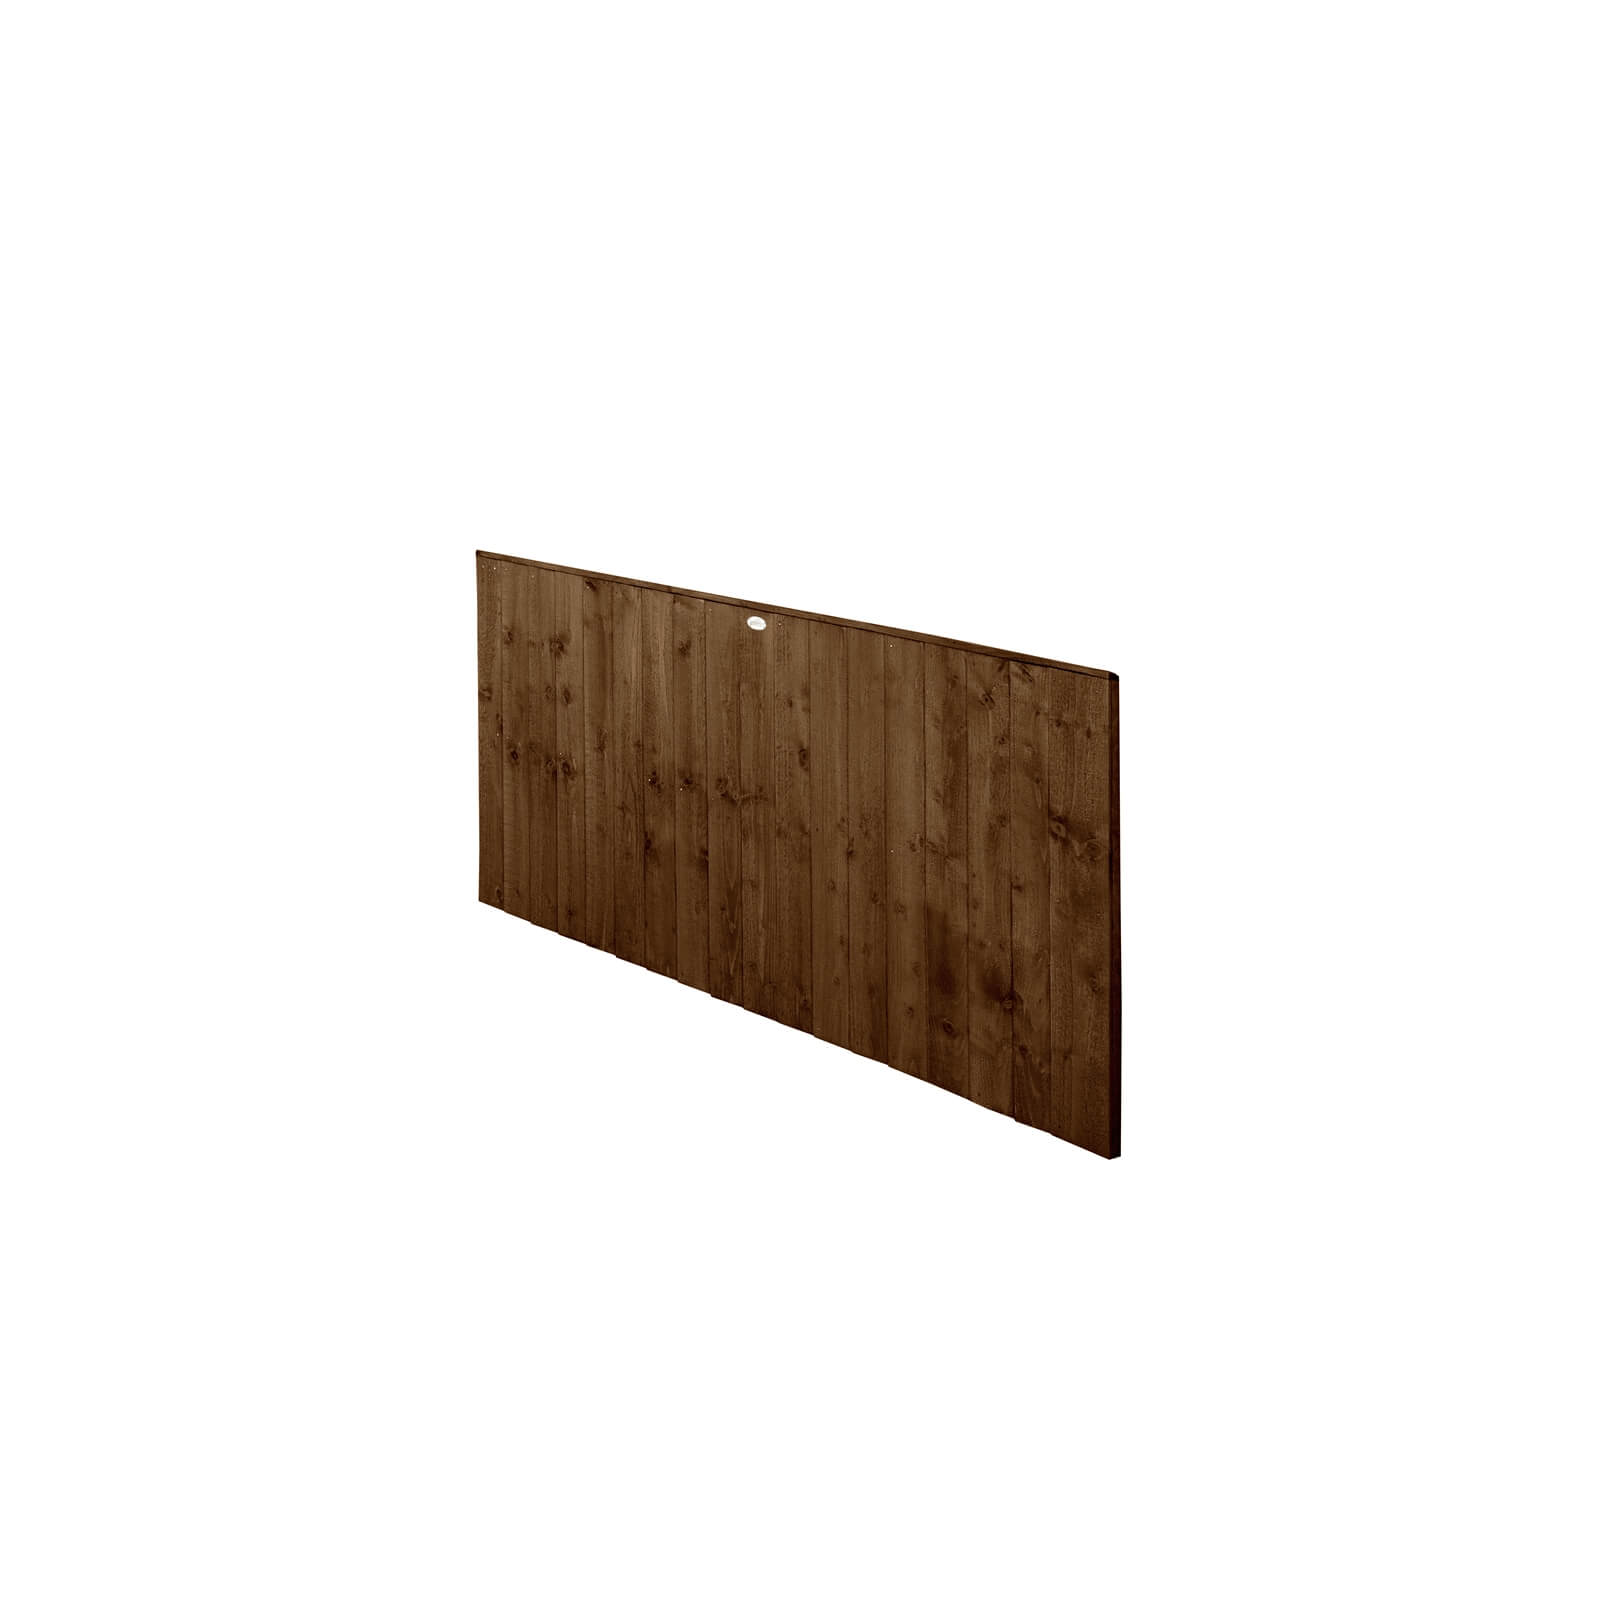 6ft x 3ft (1.83m x 0.93m) Pressure Treated Featheredge Fence Panel (Dark Brown) - Pack of 4